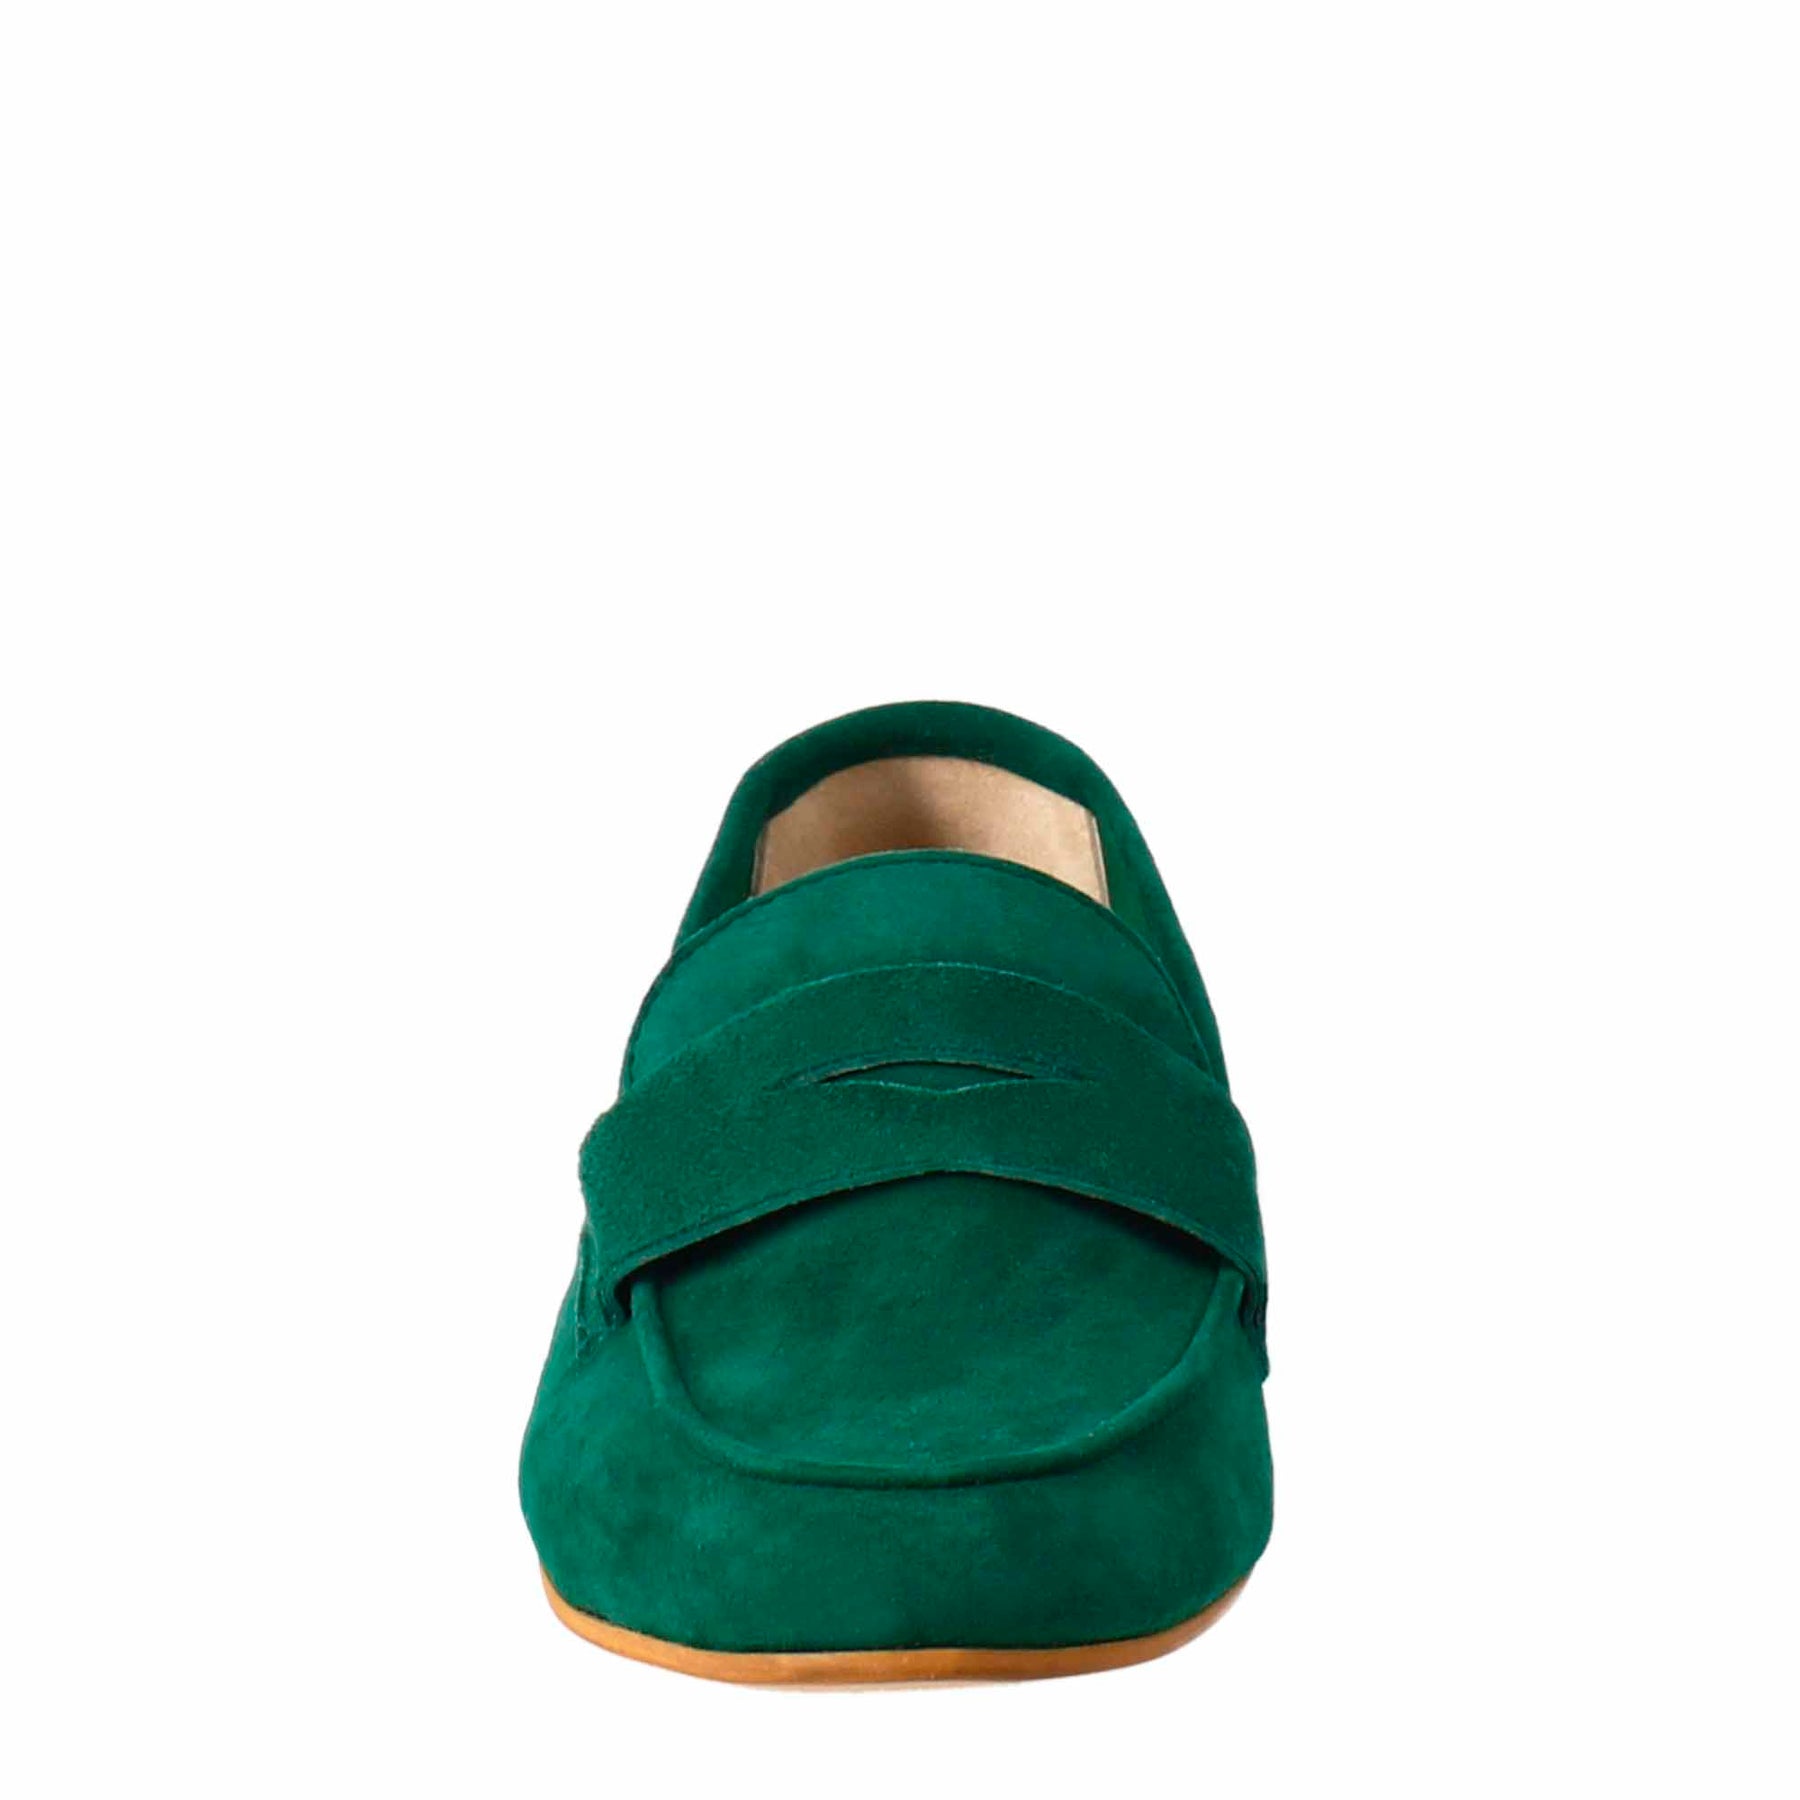 Handmade moccasin for women in green suede.